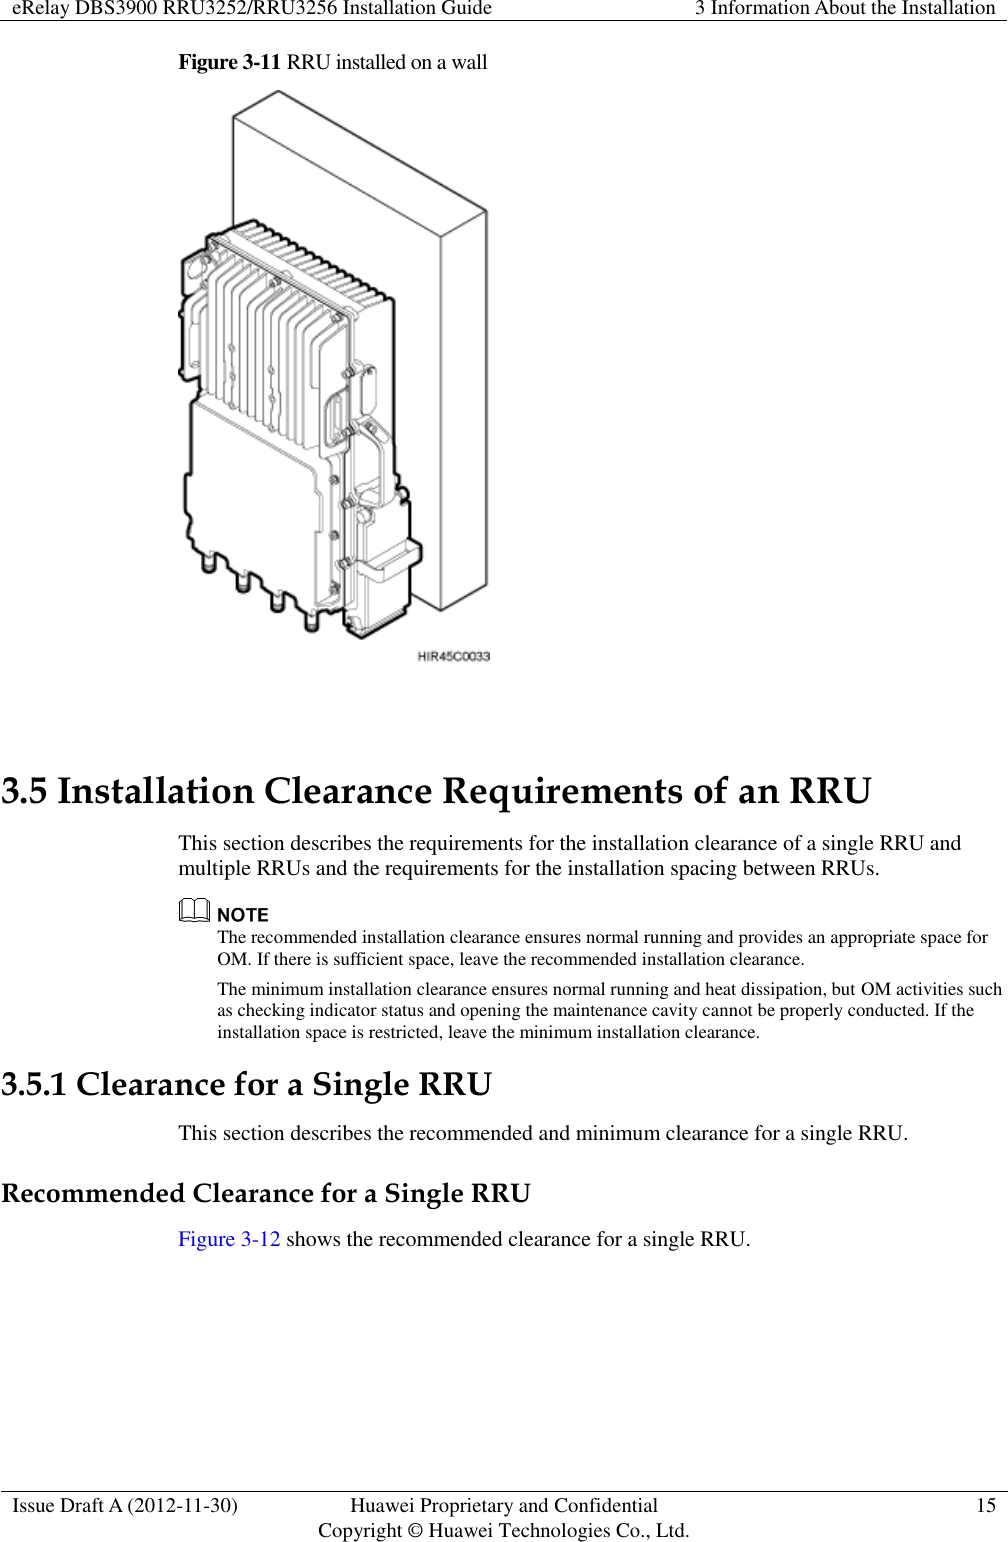 eRelay DBS3900 RRU3252/RRU3256 Installation Guide 3 Information About the Installation  Issue Draft A (2012-11-30) Huawei Proprietary and Confidential                                     Copyright © Huawei Technologies Co., Ltd. 15  Figure 3-11 RRU installed on a wall   3.5 Installation Clearance Requirements of an RRU This section describes the requirements for the installation clearance of a single RRU and multiple RRUs and the requirements for the installation spacing between RRUs.  The recommended installation clearance ensures normal running and provides an appropriate space for OM. If there is sufficient space, leave the recommended installation clearance. The minimum installation clearance ensures normal running and heat dissipation, but OM activities such as checking indicator status and opening the maintenance cavity cannot be properly conducted. If the installation space is restricted, leave the minimum installation clearance. 3.5.1 Clearance for a Single RRU This section describes the recommended and minimum clearance for a single RRU. Recommended Clearance for a Single RRU Figure 3-12 shows the recommended clearance for a single RRU. 